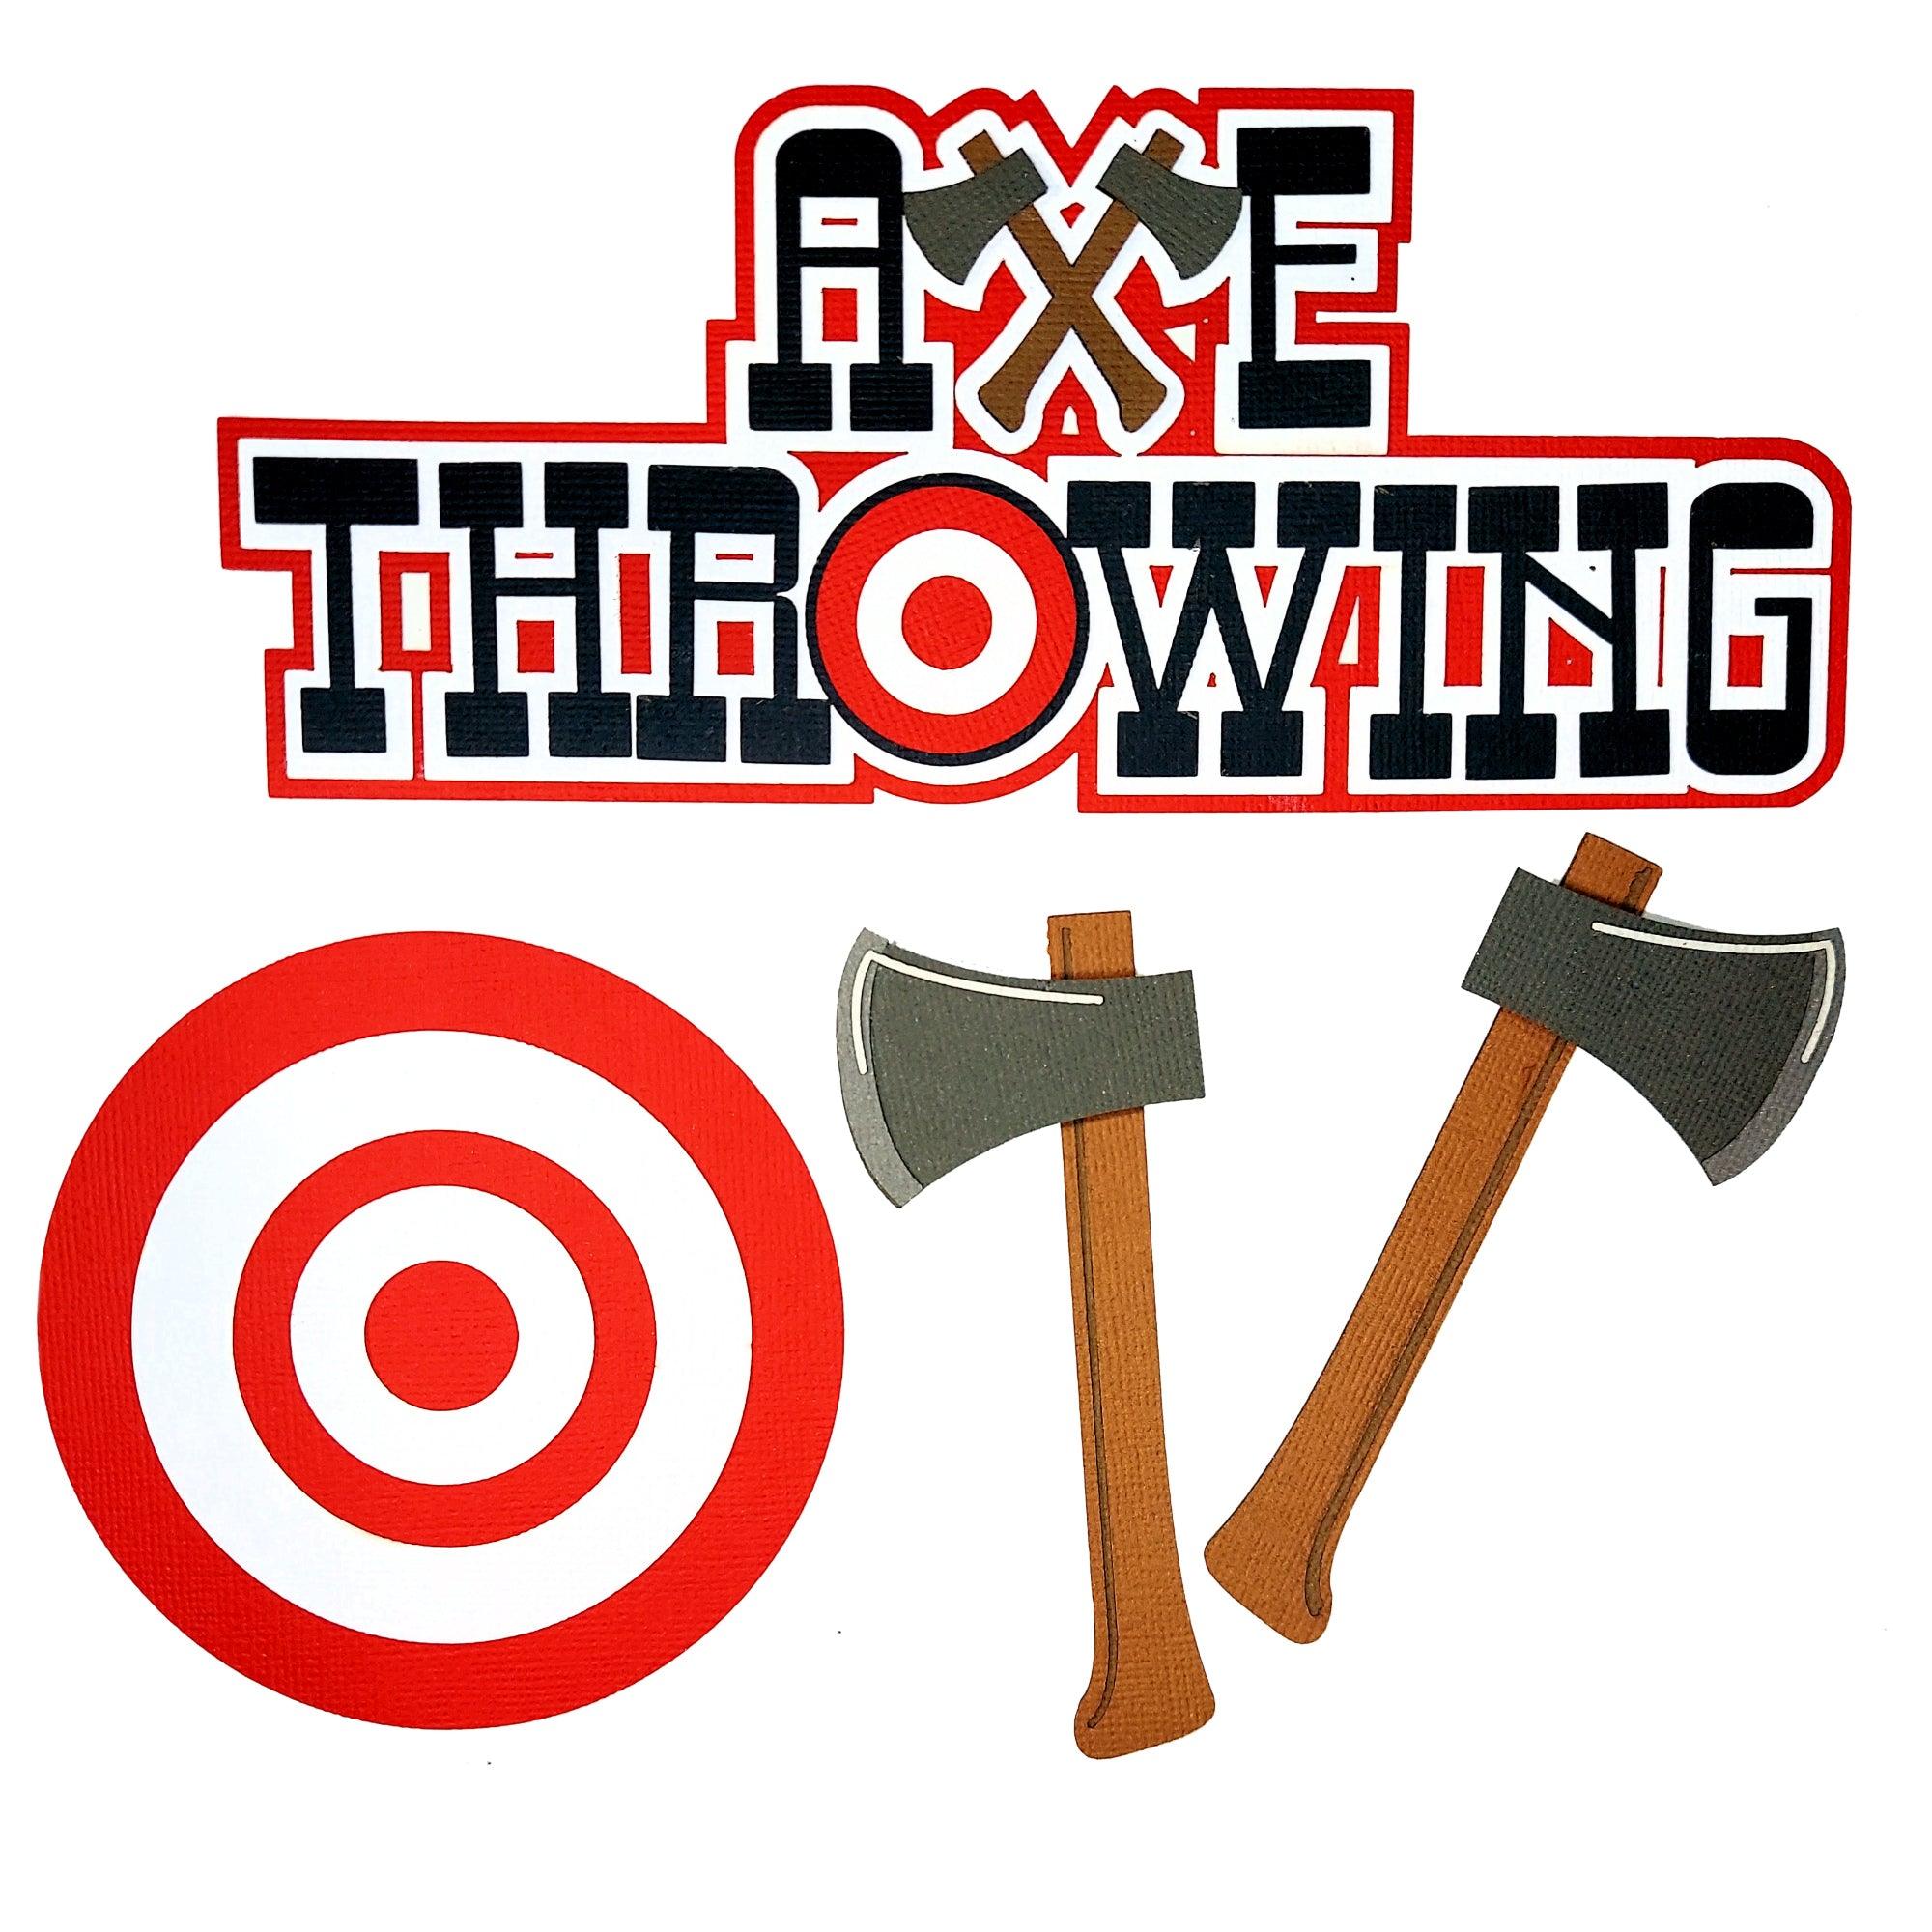 Axe Throwing 3.5 x 8 Title & Accessories Scrapbook Laser Cut Embellishments by SSC Designs